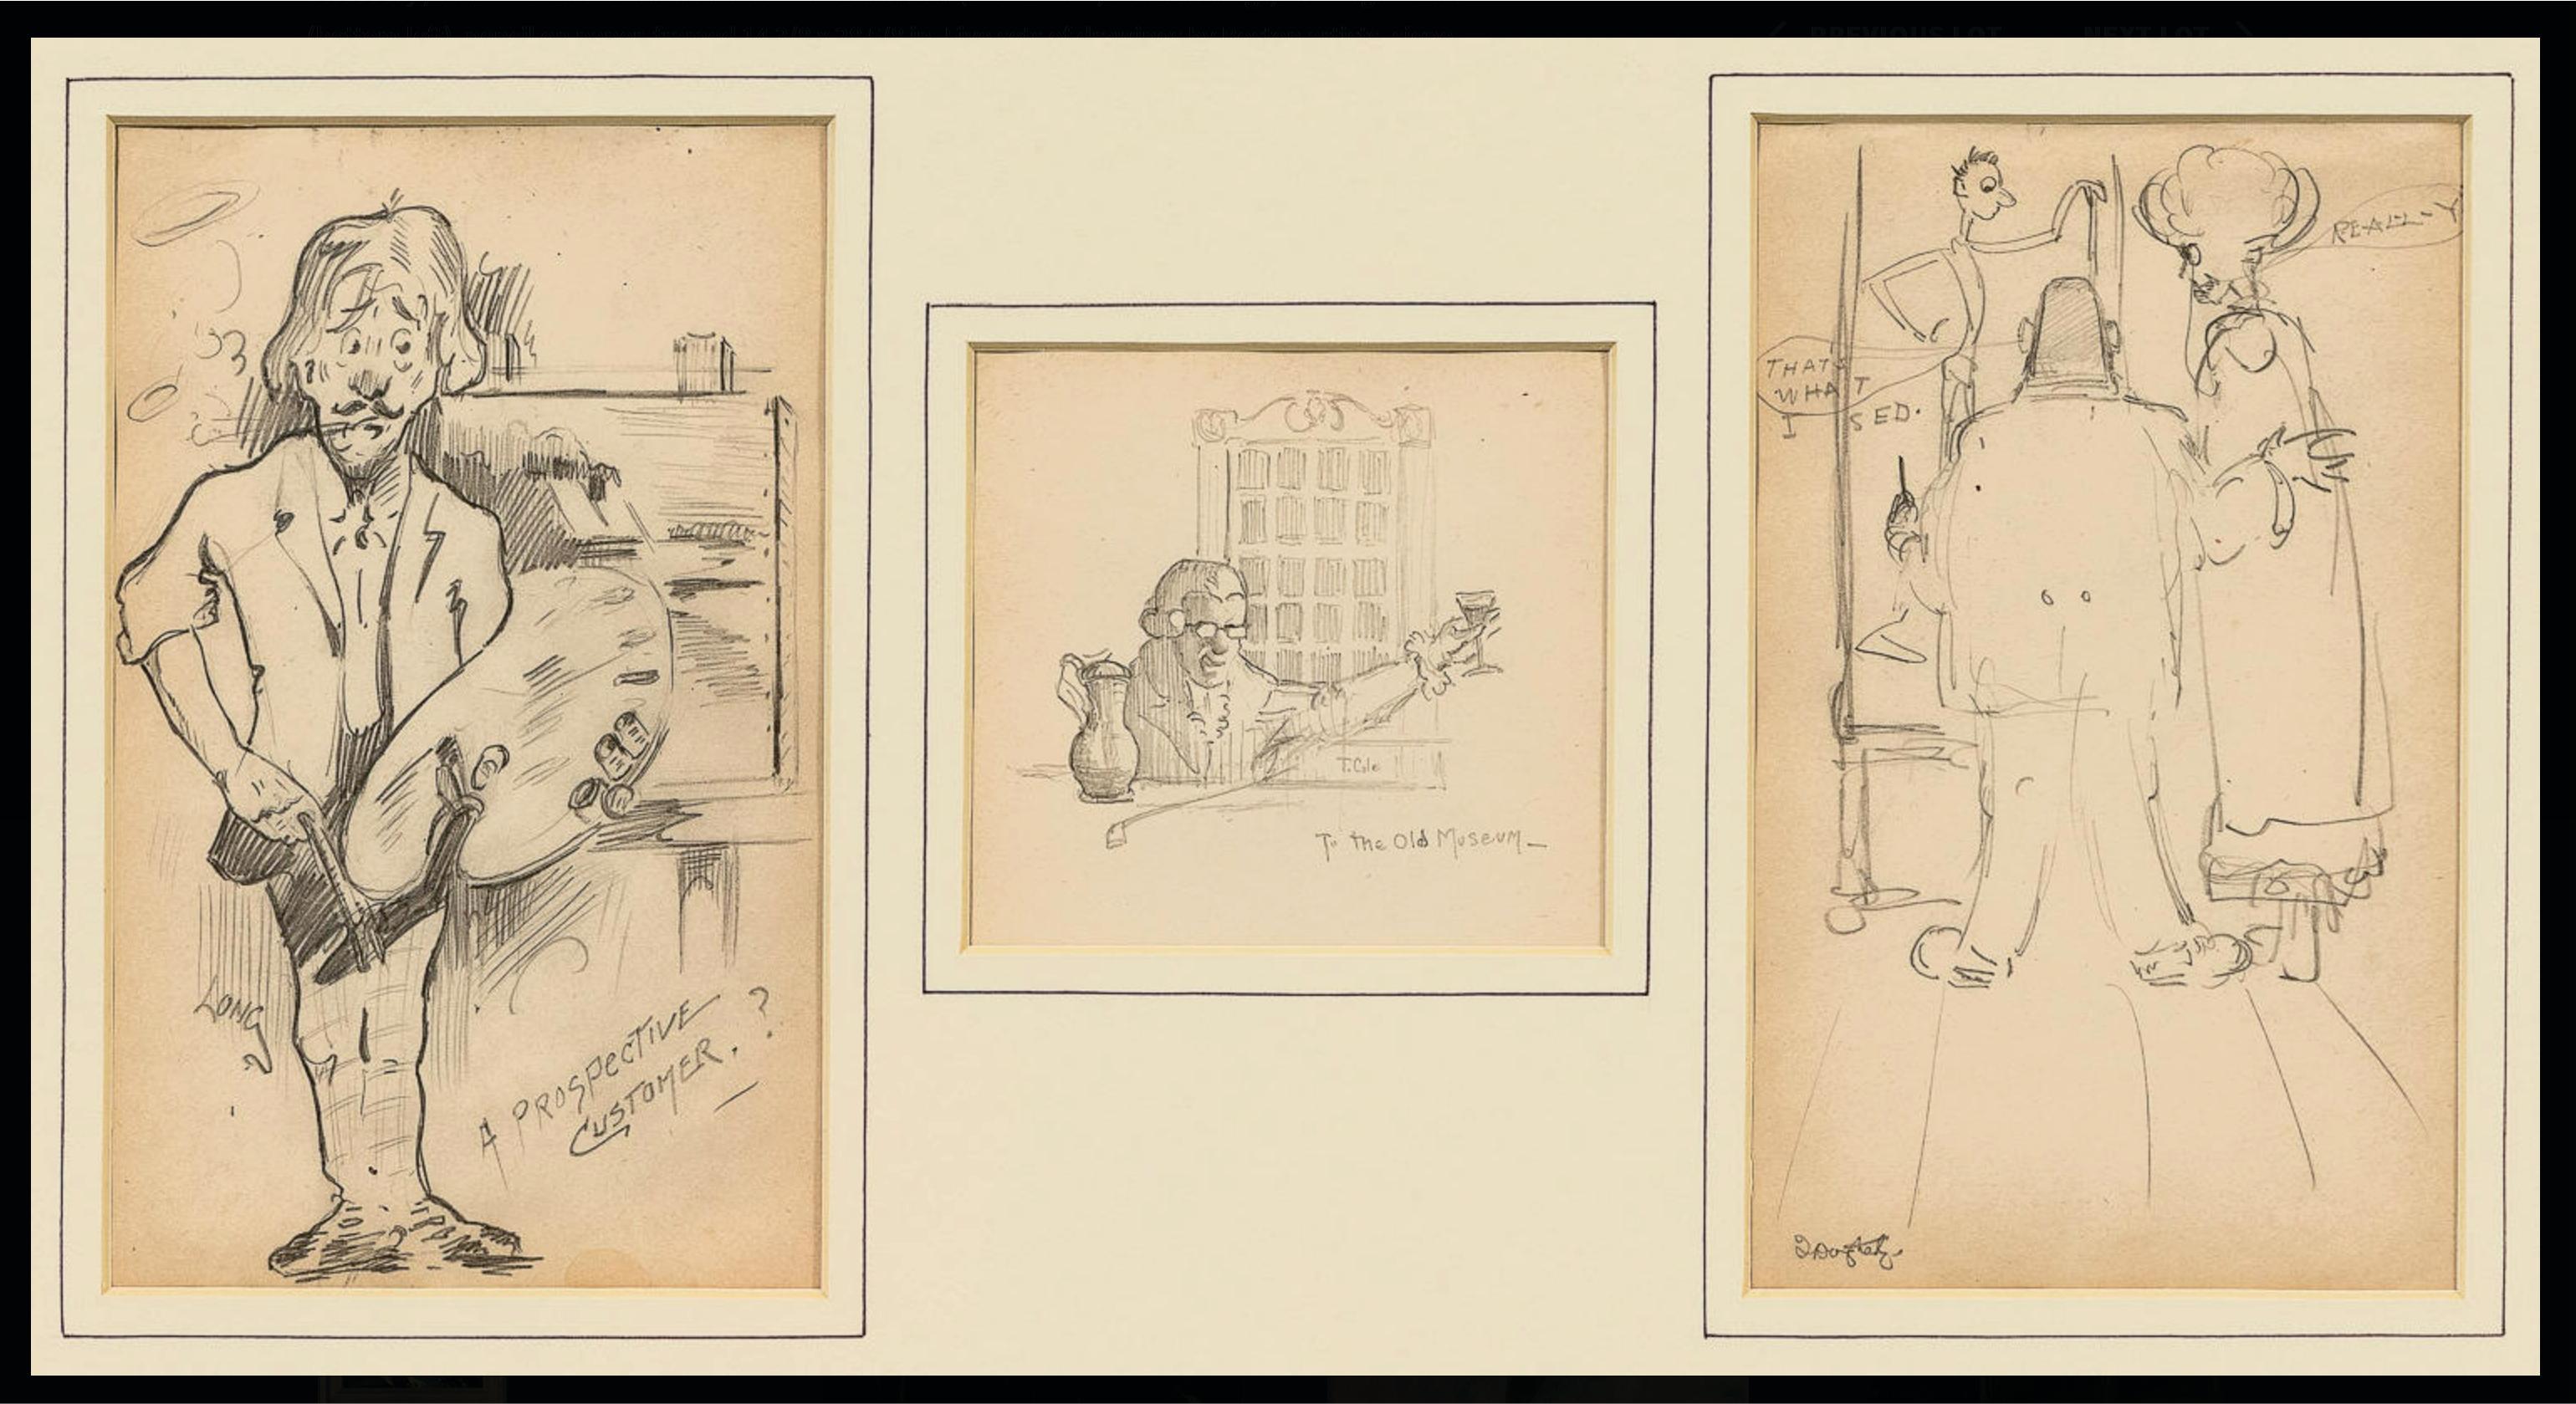 3 Drawings by a Boston Artist, Signed Early 20th Century, D3
Three drawings of figures, two 7.75